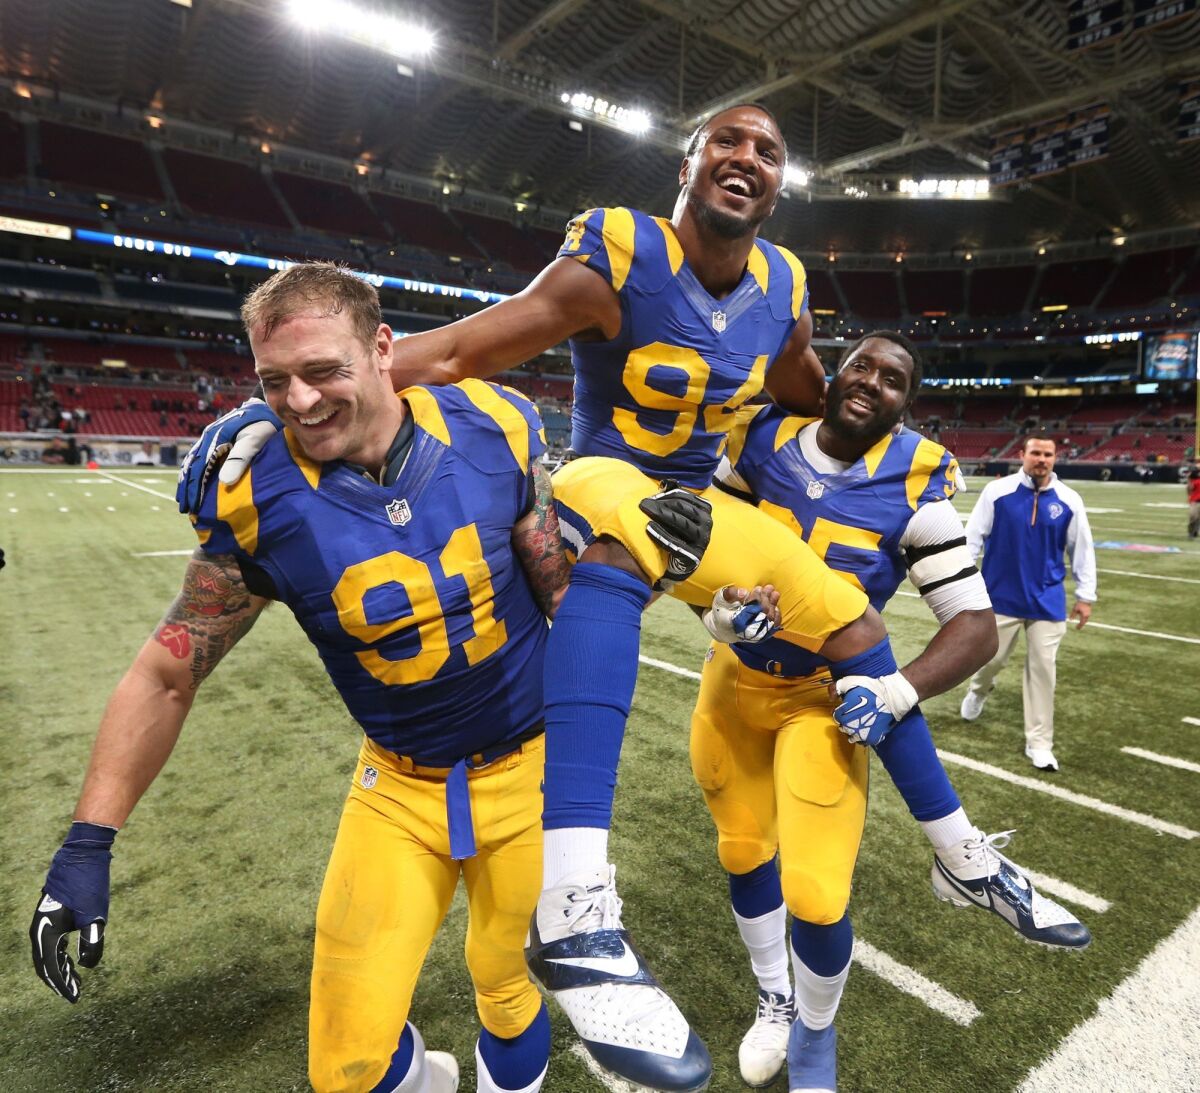 St. Louis Rams defensive end Robert Quinn is carried off the field by fellow defensive ends Chris Long, left, and William Hayes after setting the franchise single-season sack record at 18, following an NFL football game against the Tampa Bay Buccaneers on Sunday, Dec. 22, 2013, in St. Louis. The Rams won 23-13. (AP Photo/St. Louis Post-Dispatch, Chris Lee) EDWARDSVILLE OUT ALTON OUT The Associated Press